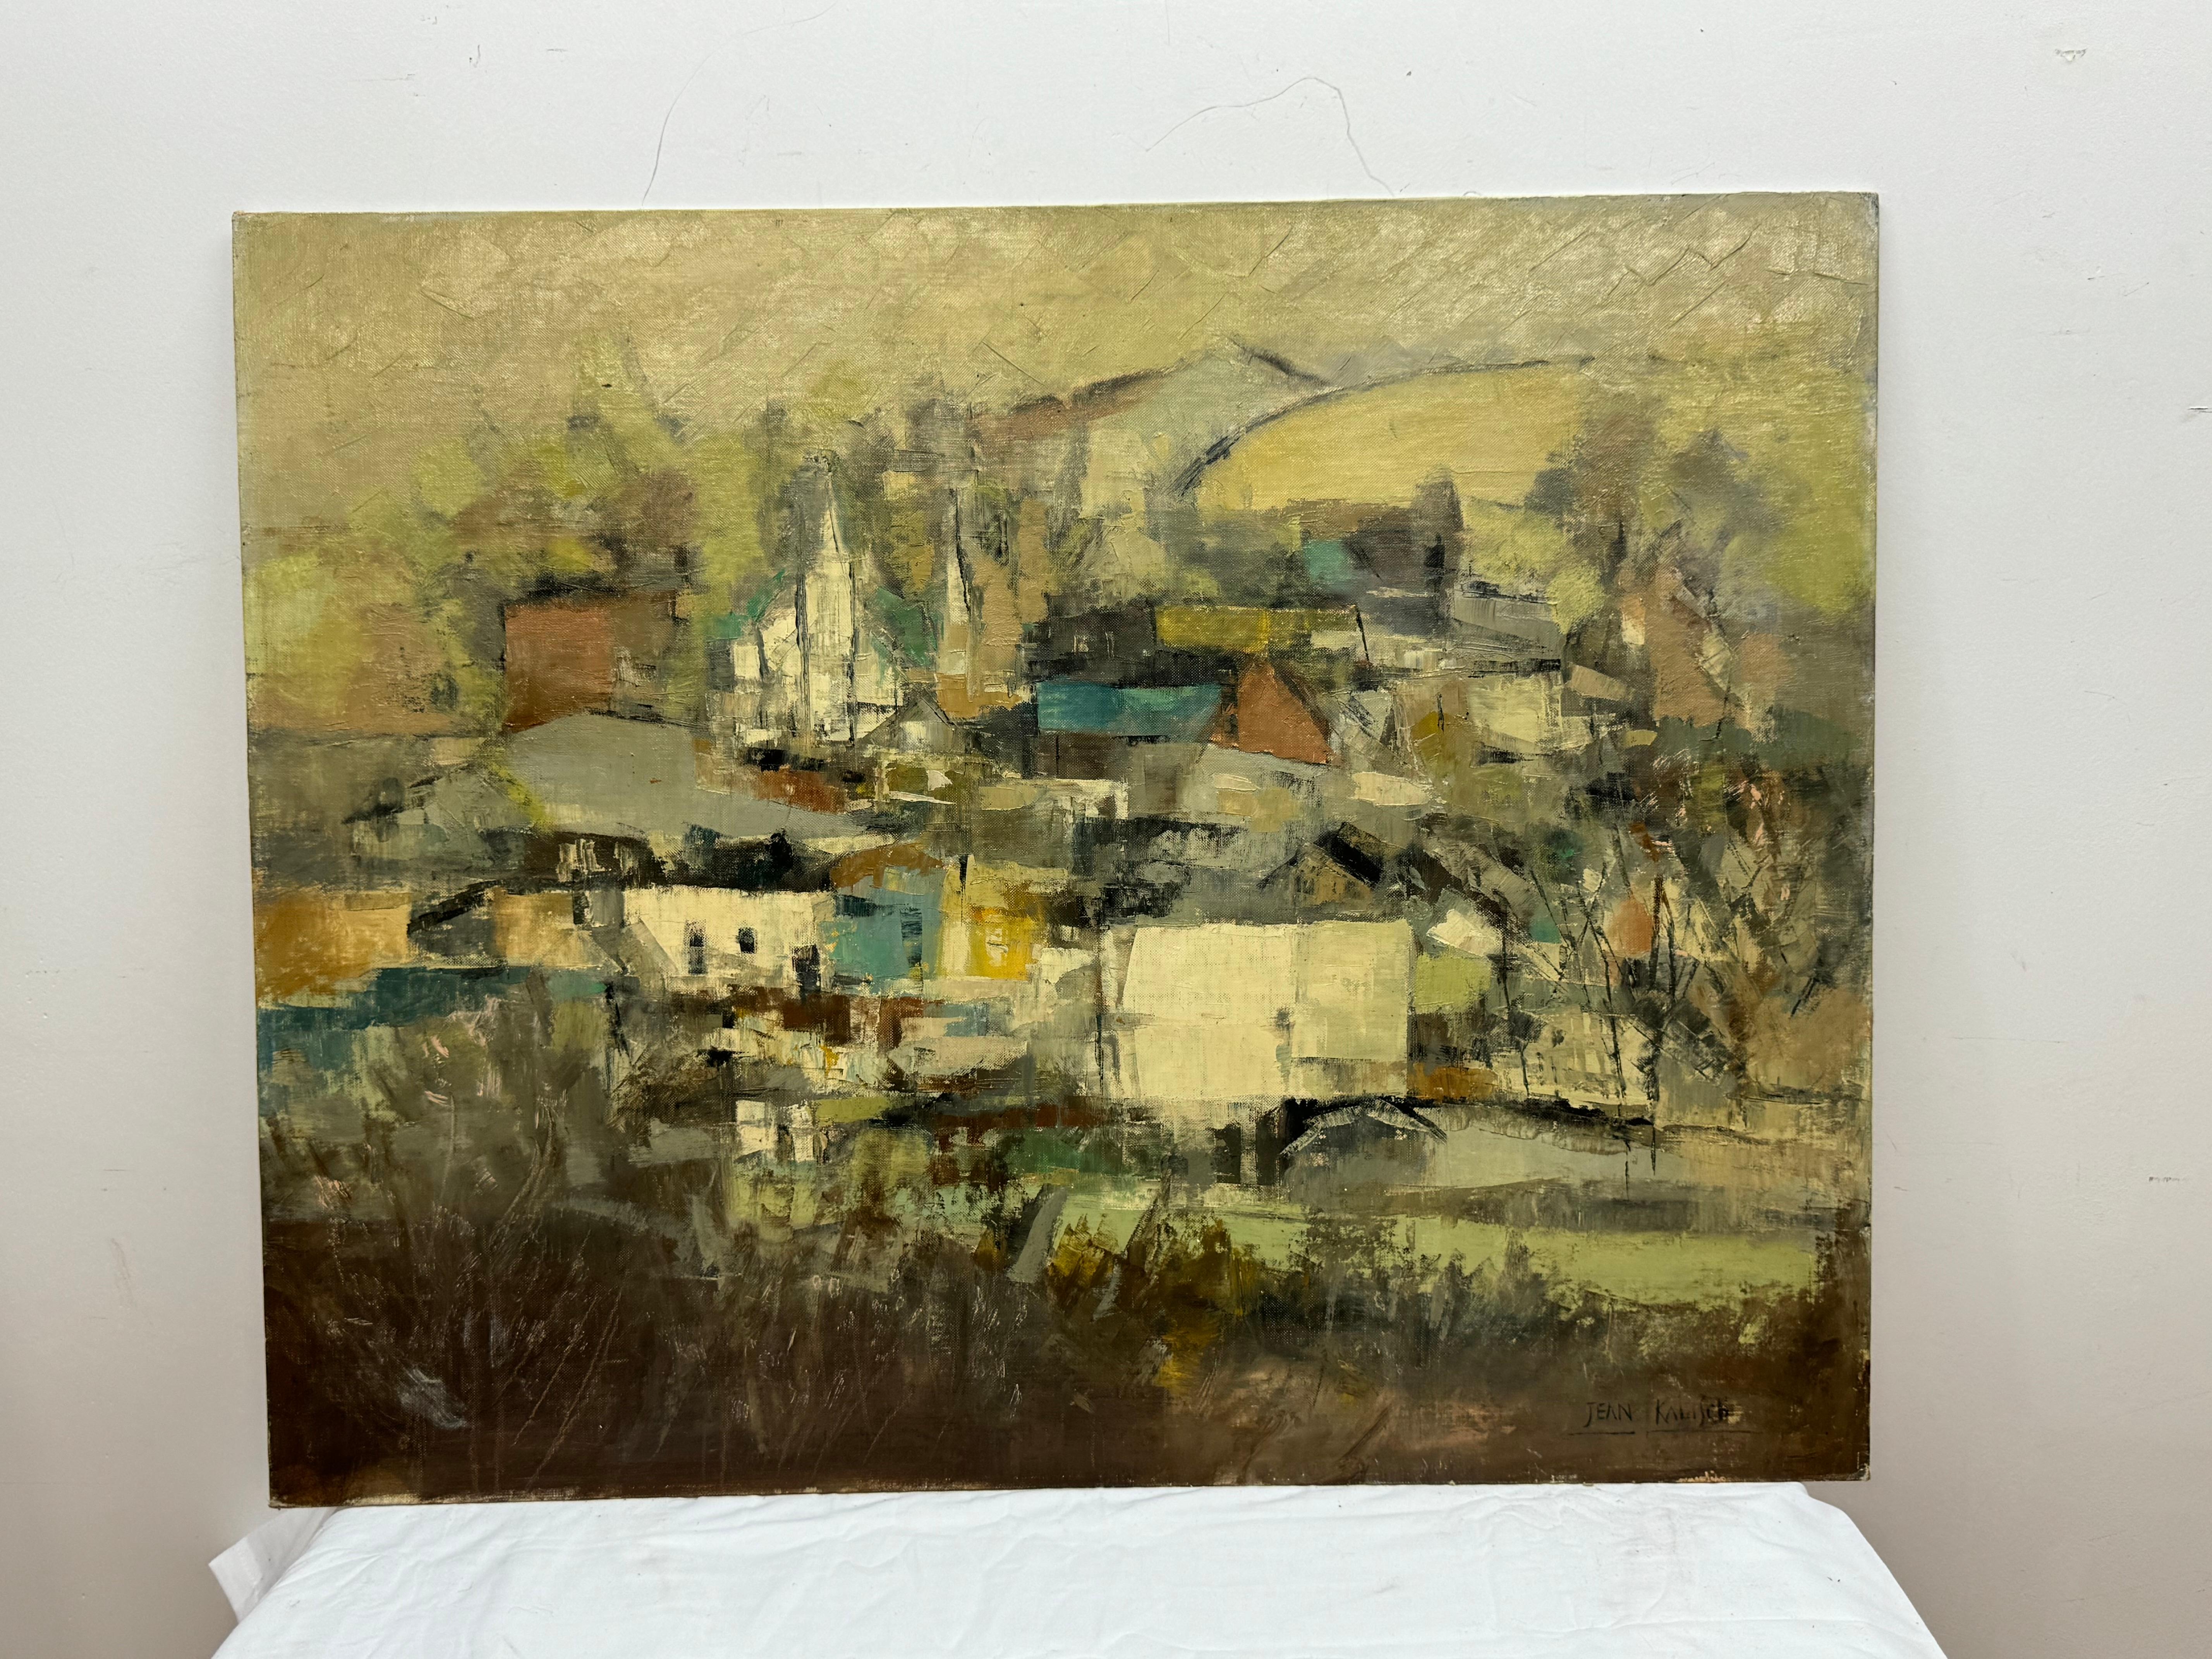 Jean Kallsch, 

View of abstract village with fields   